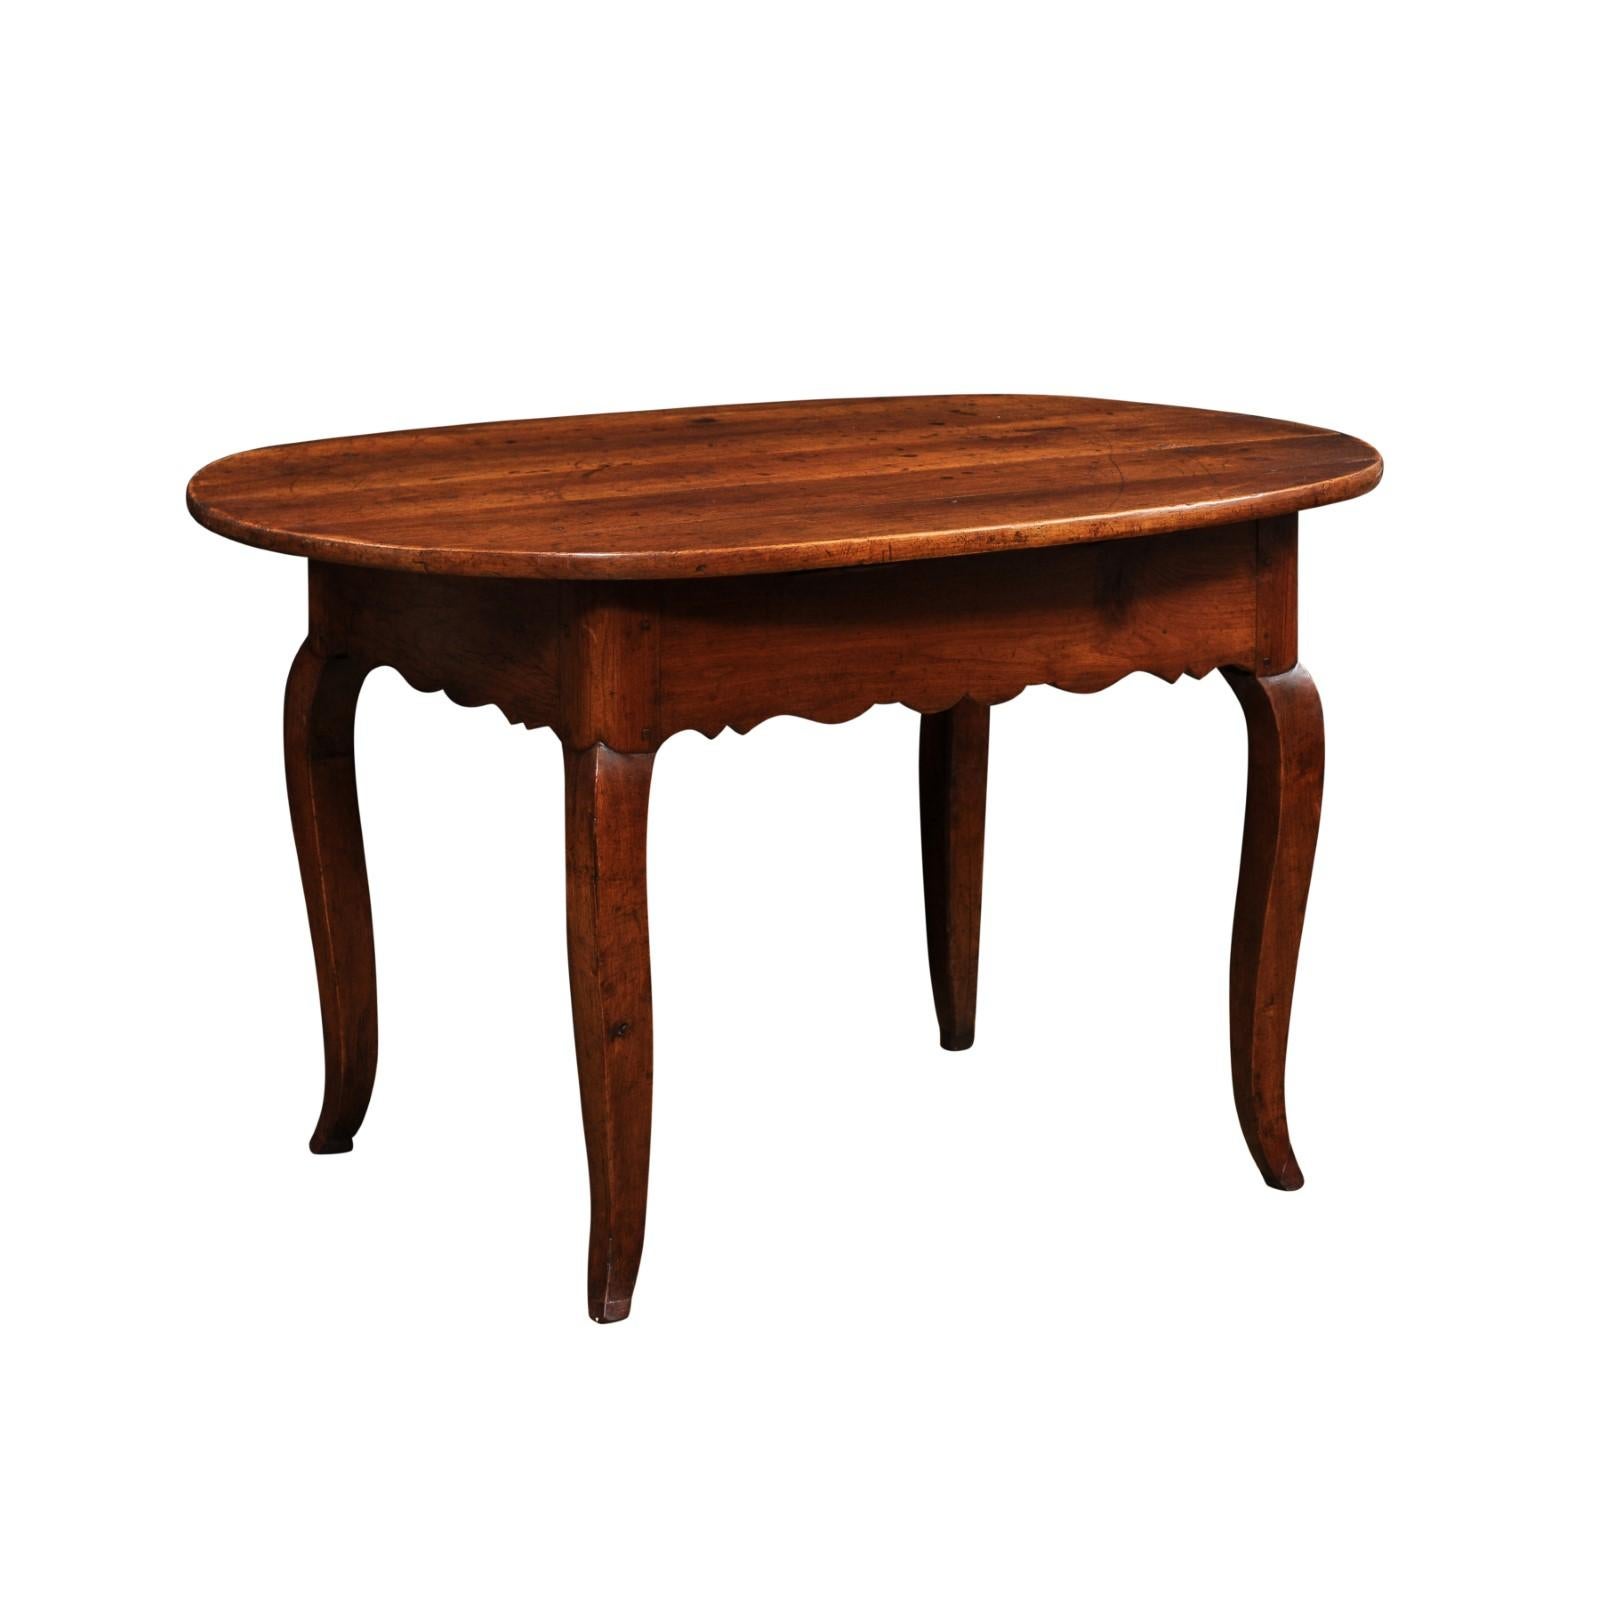 A French Louis XV style wooden center table from the early 19th century, with oval top, cabriole legs and carved apron. Created in France during the Restauration period which saw the return of the monarchy after the Revolution, this center table